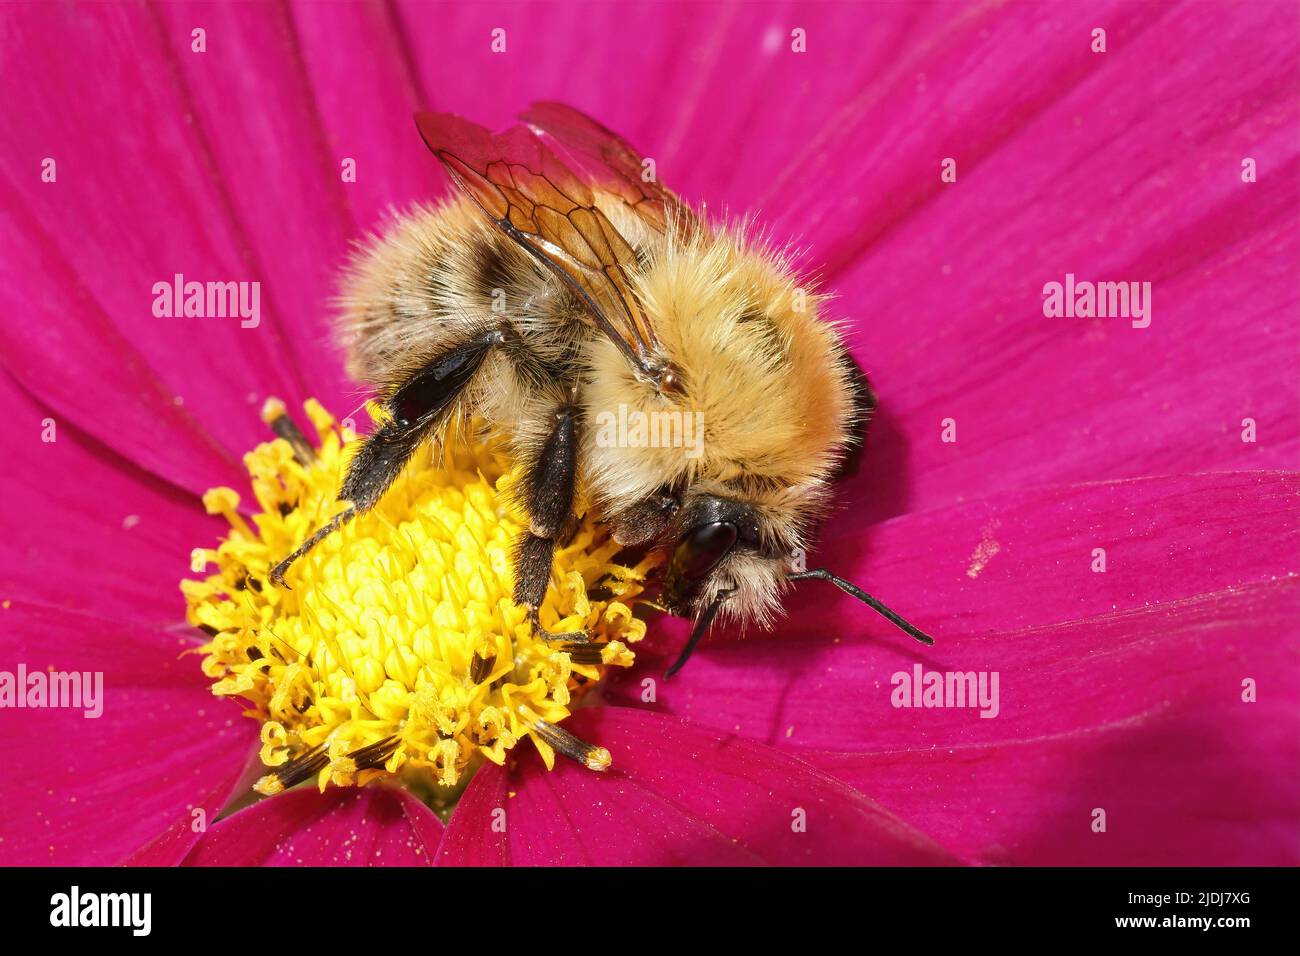 Closeup on an unusual colored fluffy yellow queen Common carder bee , Bombus pascuorum in a brilliant purple Cosmos flower in the garden Stock Photo